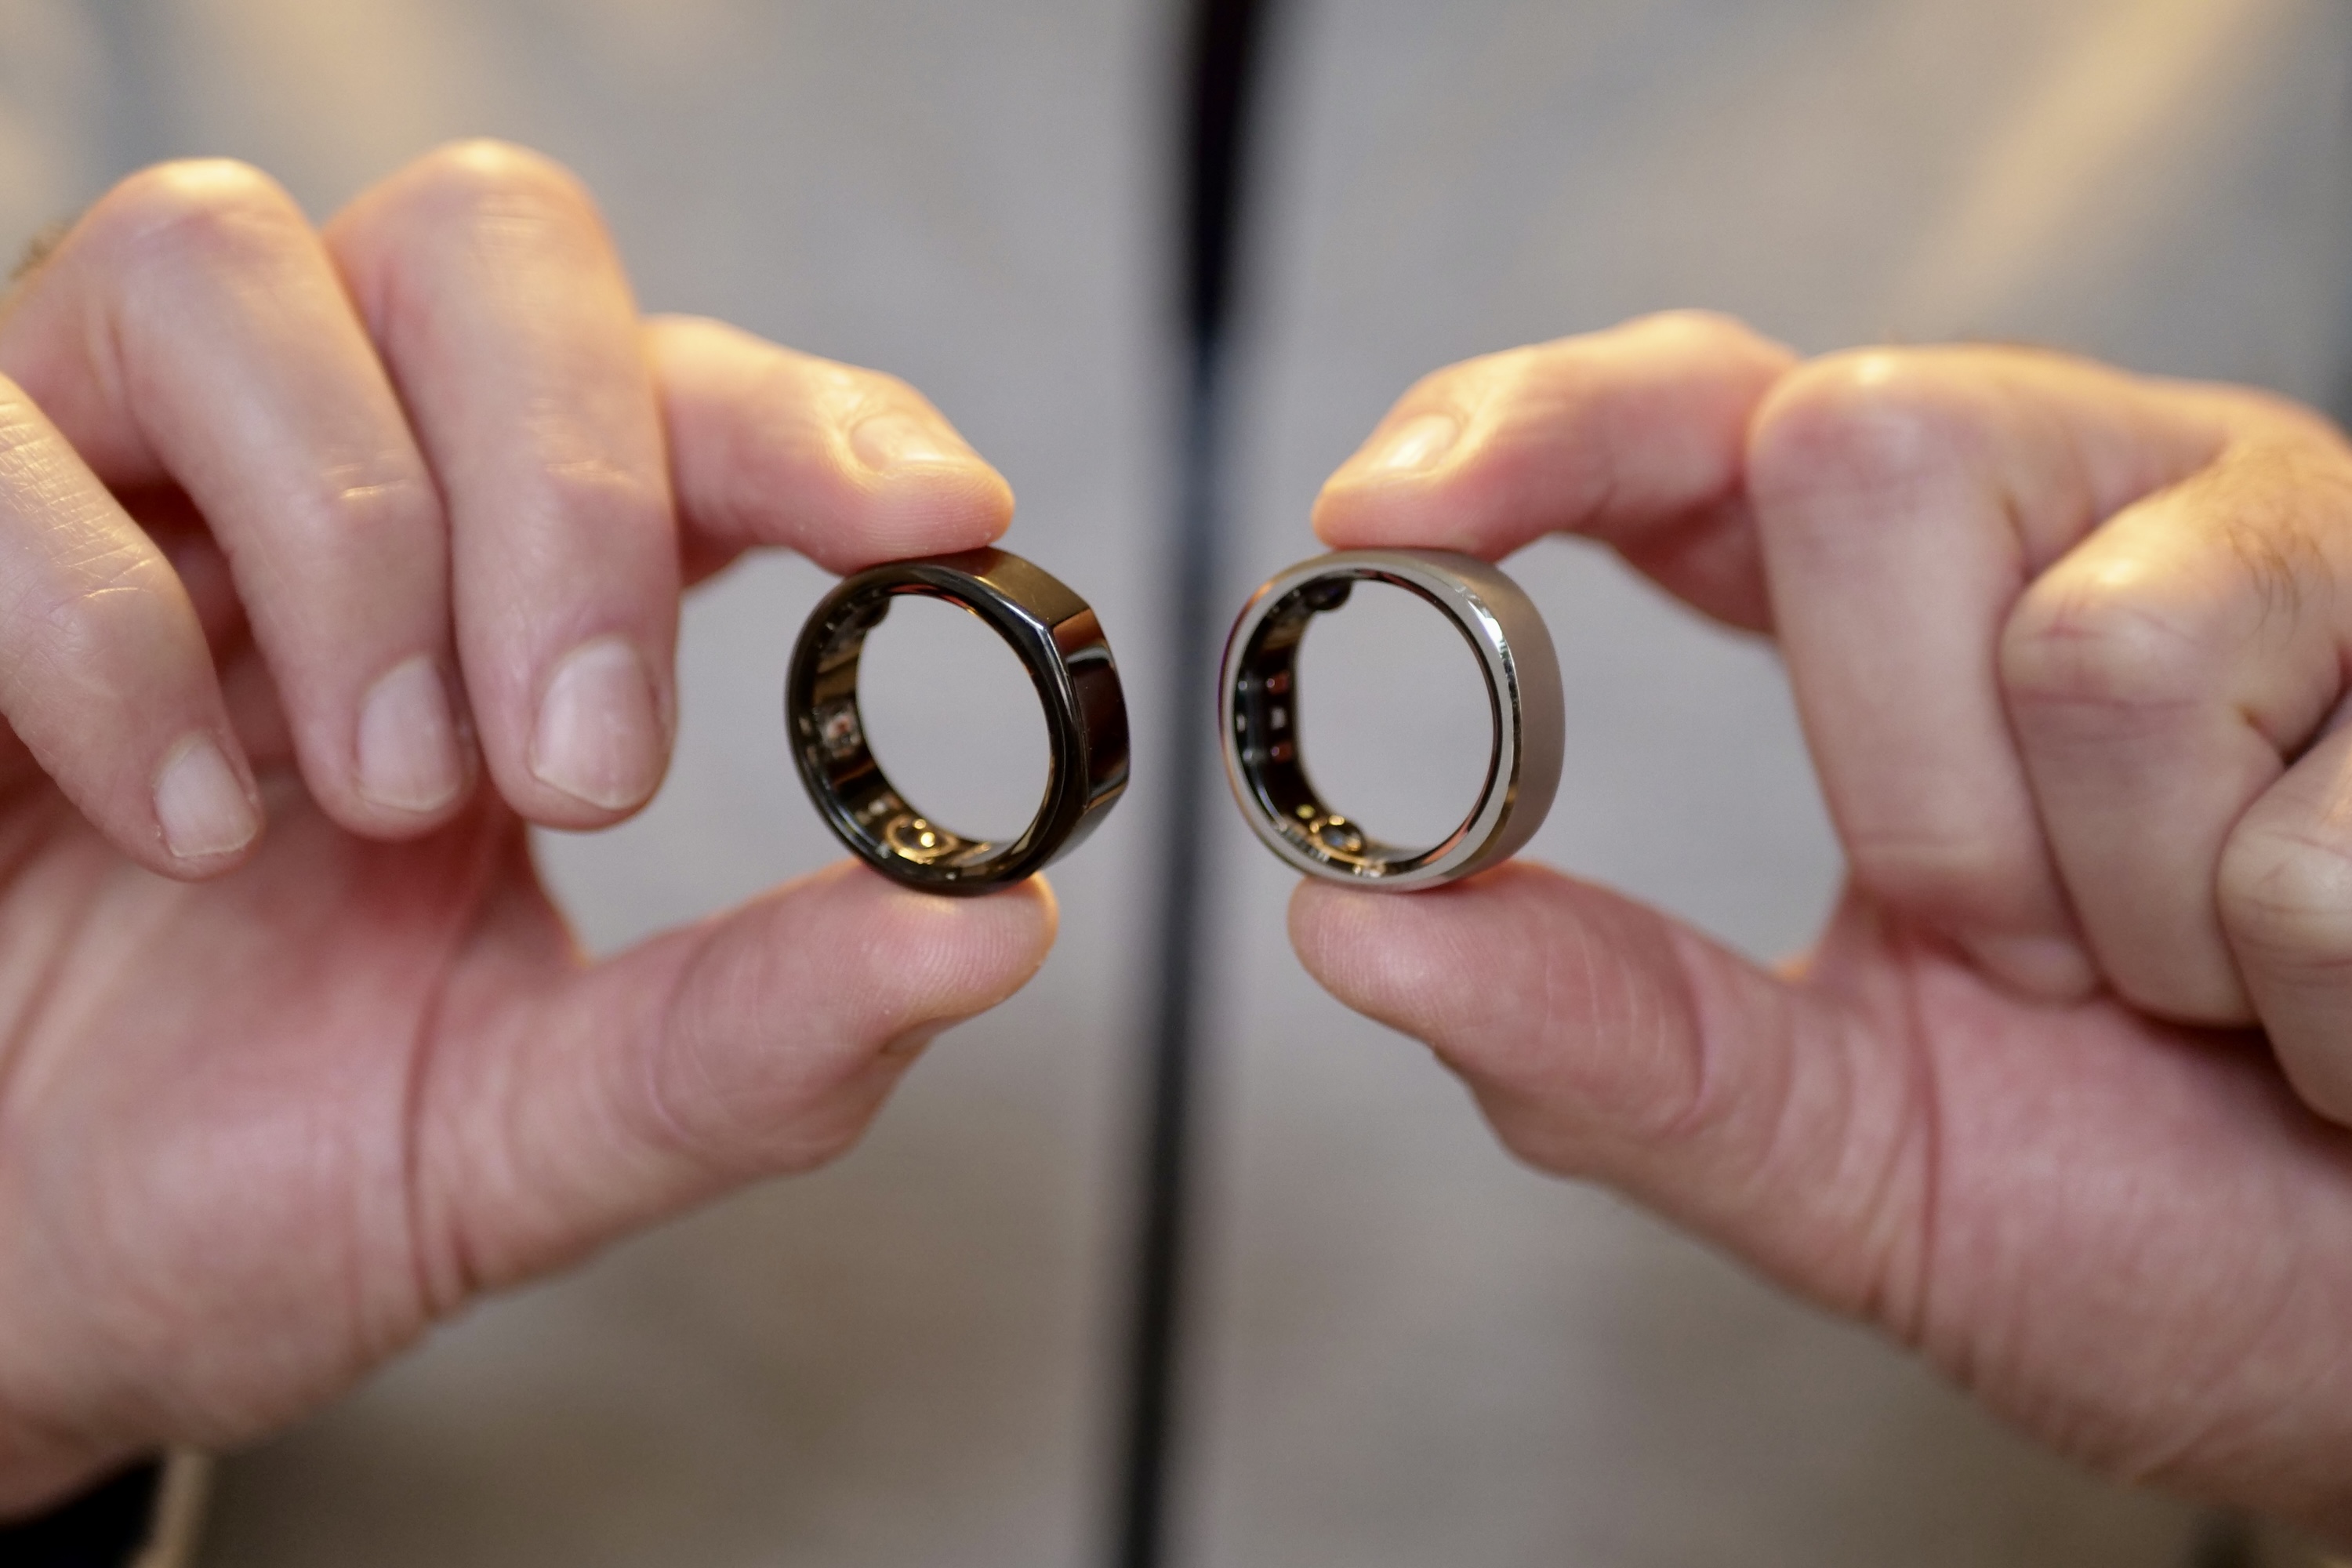 Things to know before buying a Smart Ring